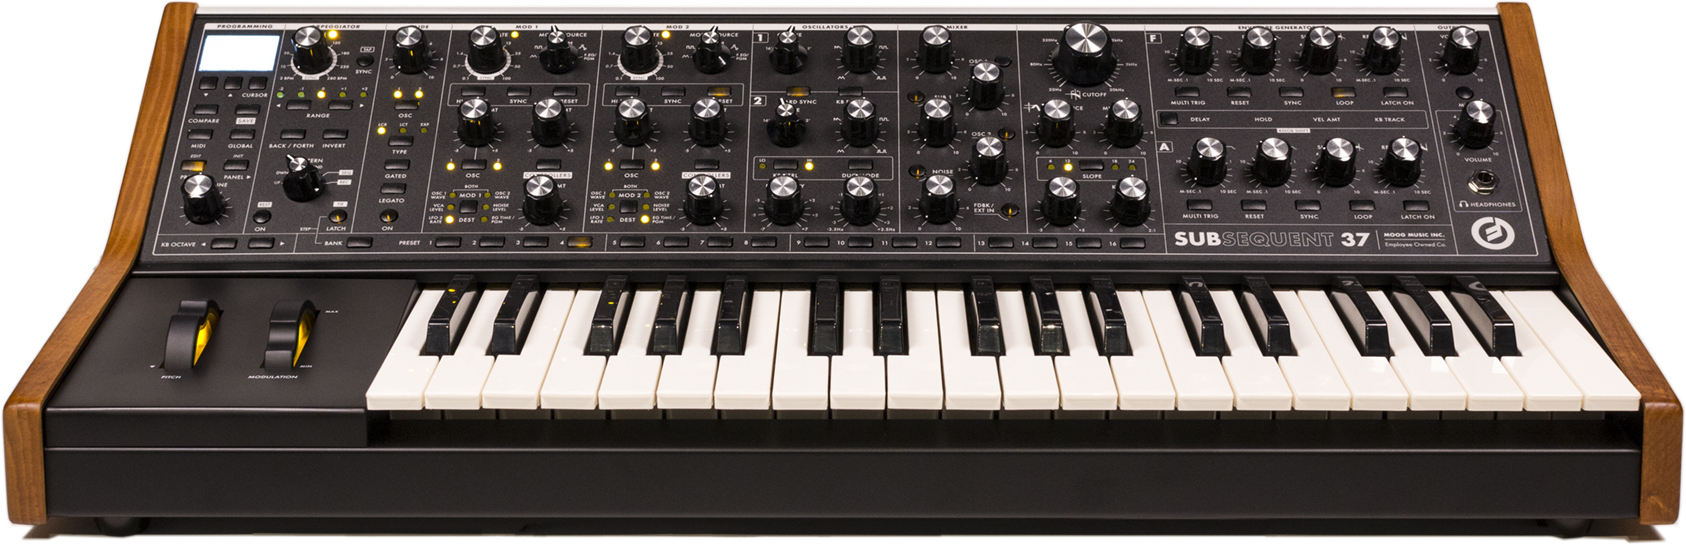 Moog Subsequent 37 - Synthesizer - Main picture